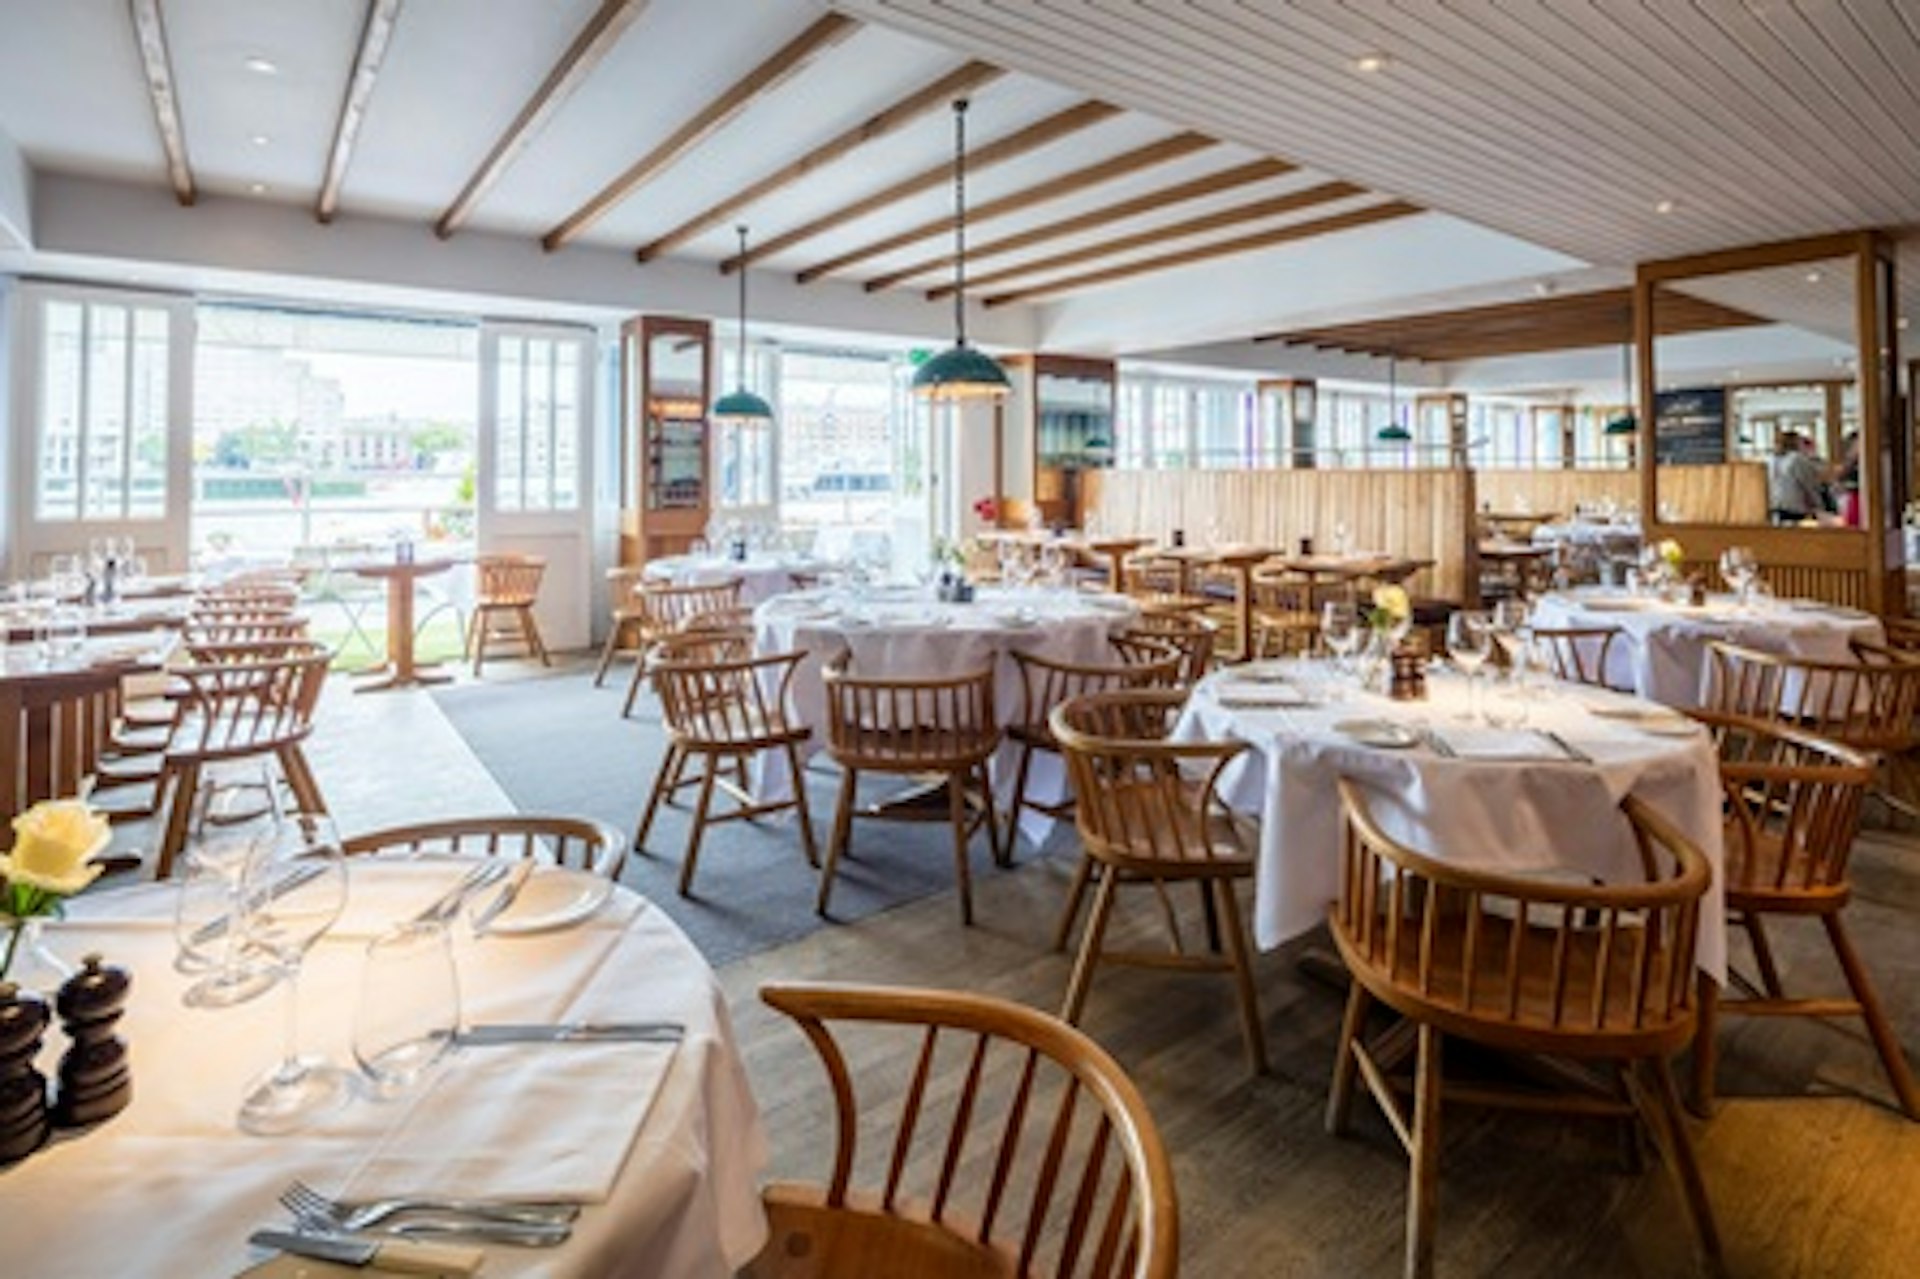 Date Night with Three Course Dinner and Fizz for Two at Butlers Wharf Chop House 3